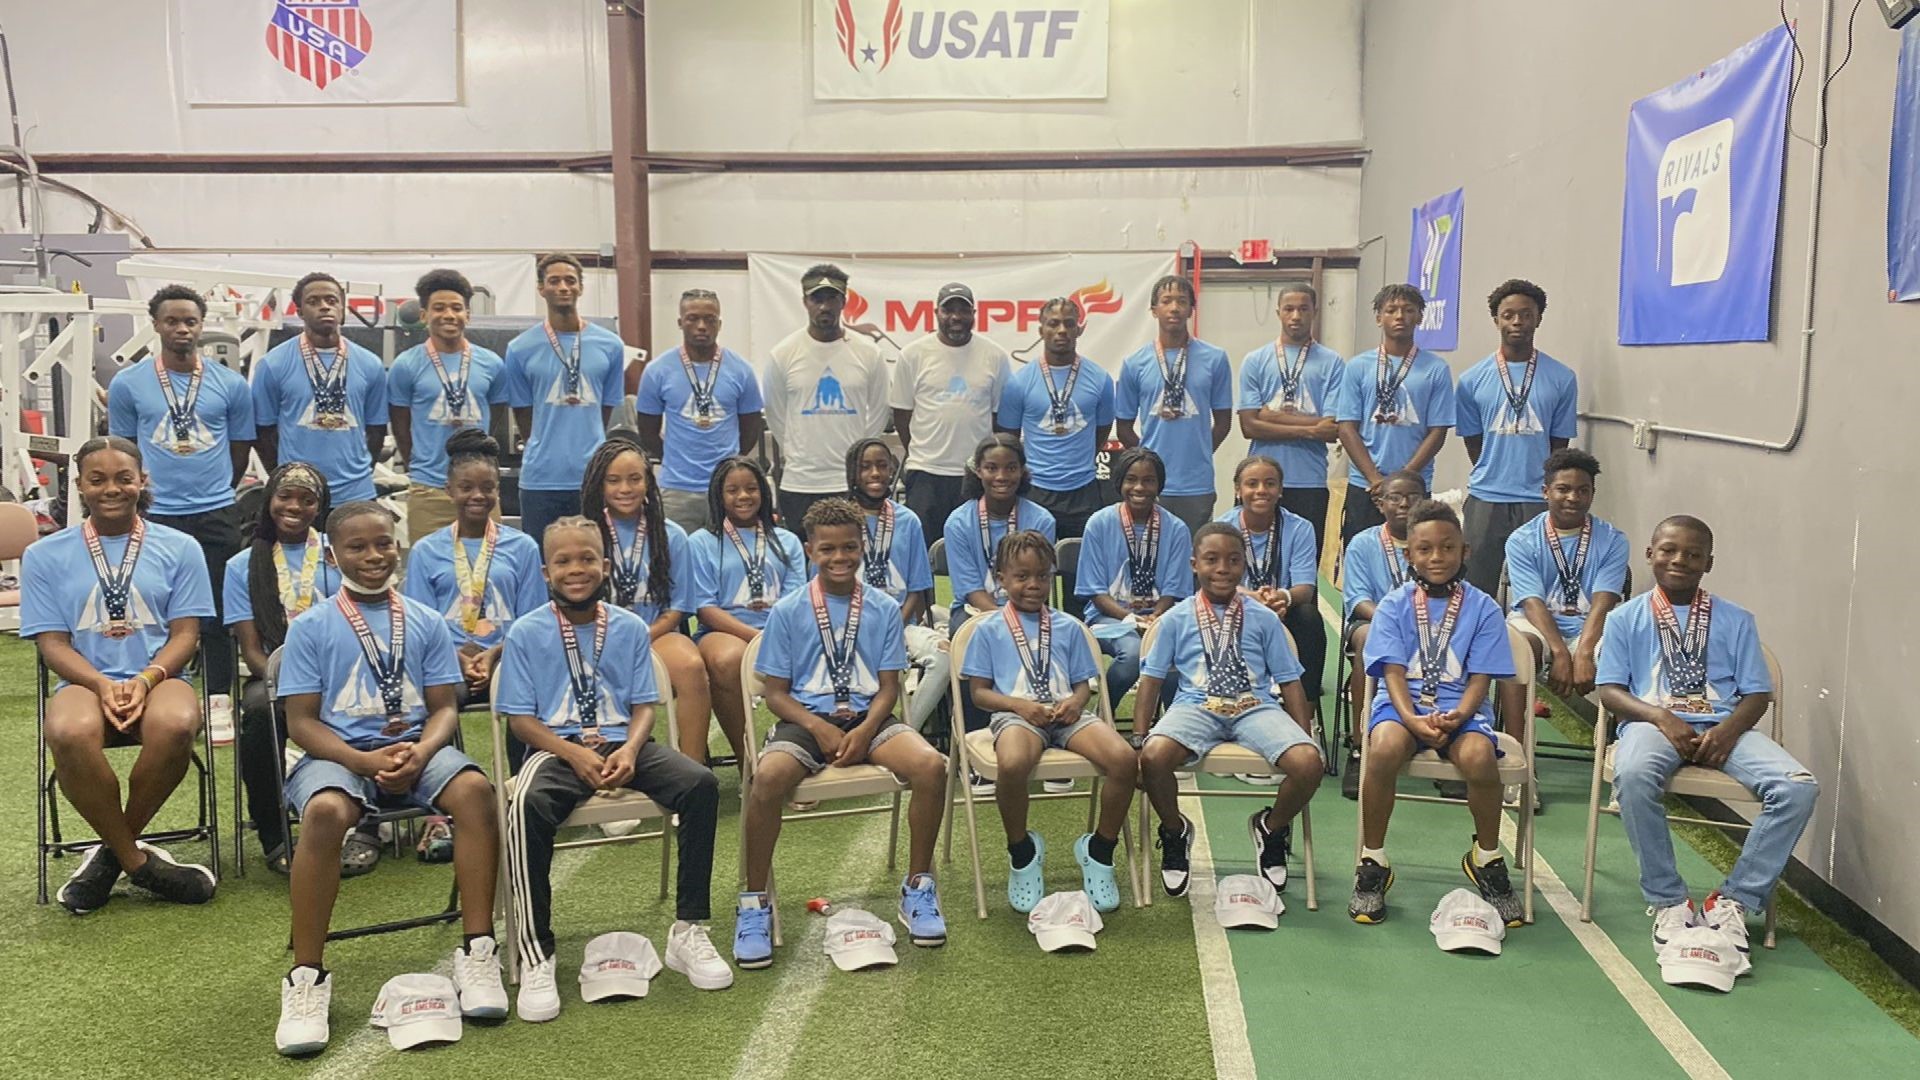 Local AAU Track Club is home to 50 AllAmericans